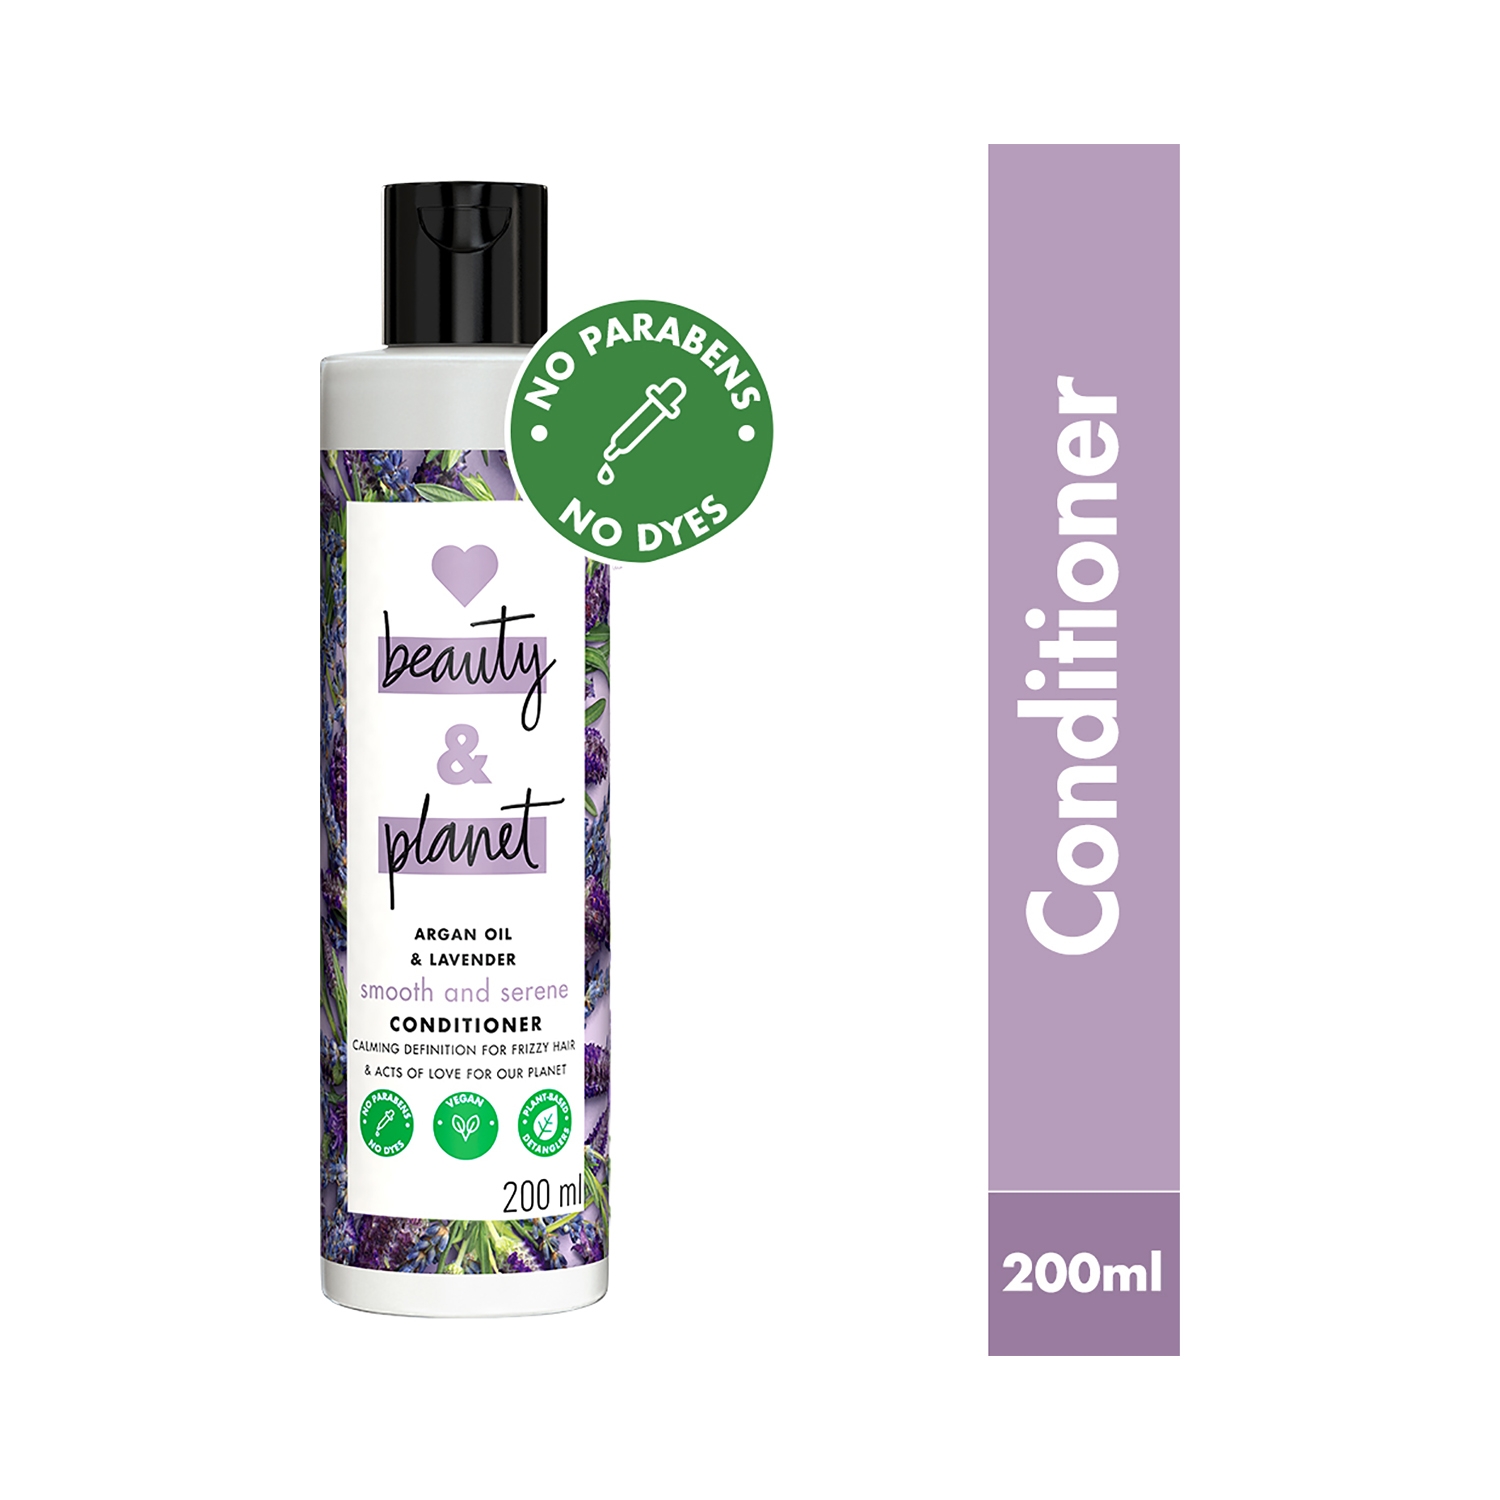 Love Beauty & Planet Argan Oil and Lavender Smooth and Serene Conditioner (200ml)